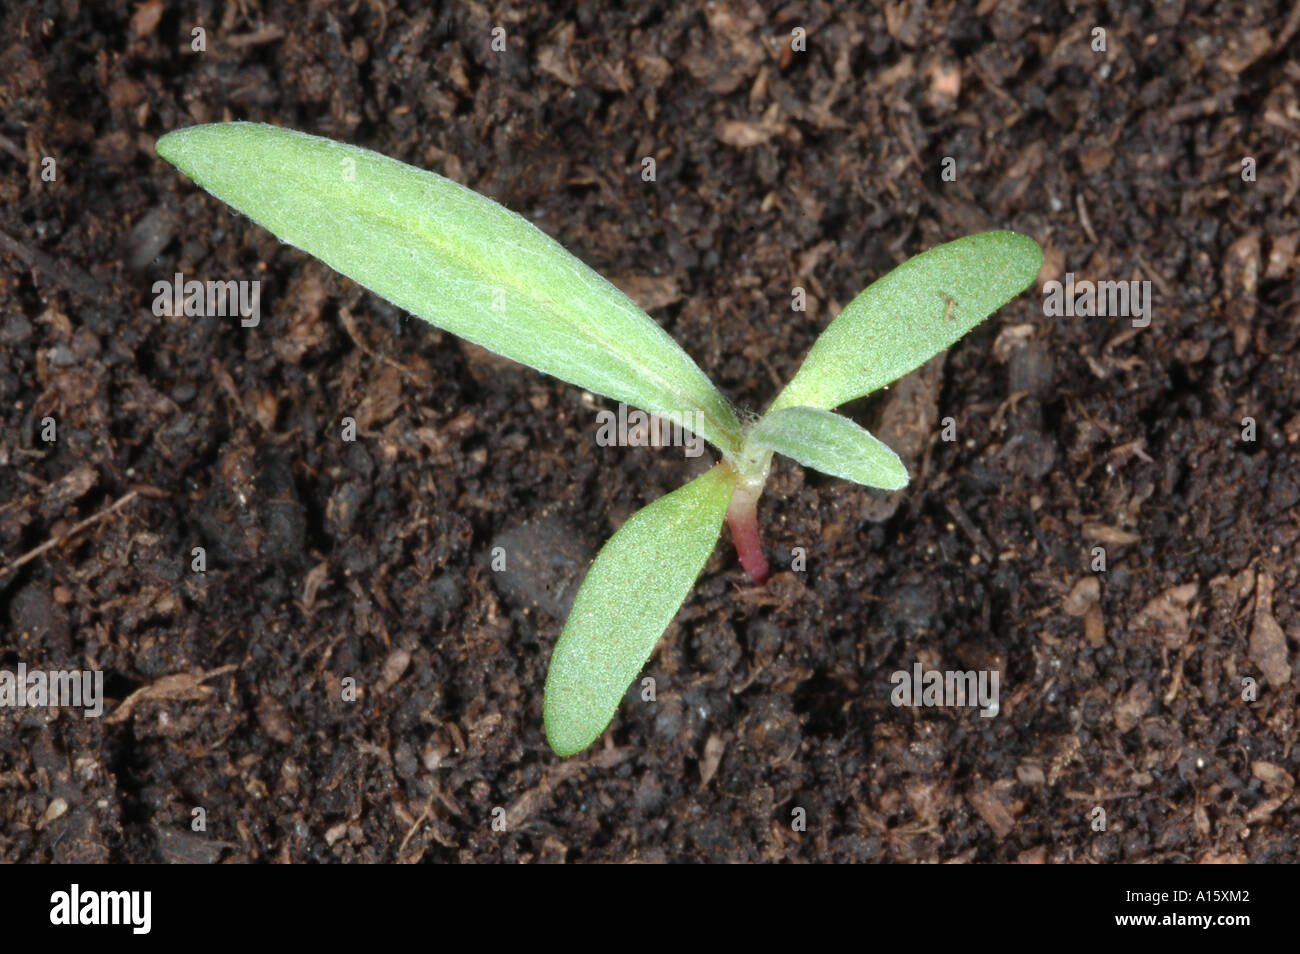 Pale persicaria, Persicaria lapathifolia, seedling with two true leasves developing Stock Photo